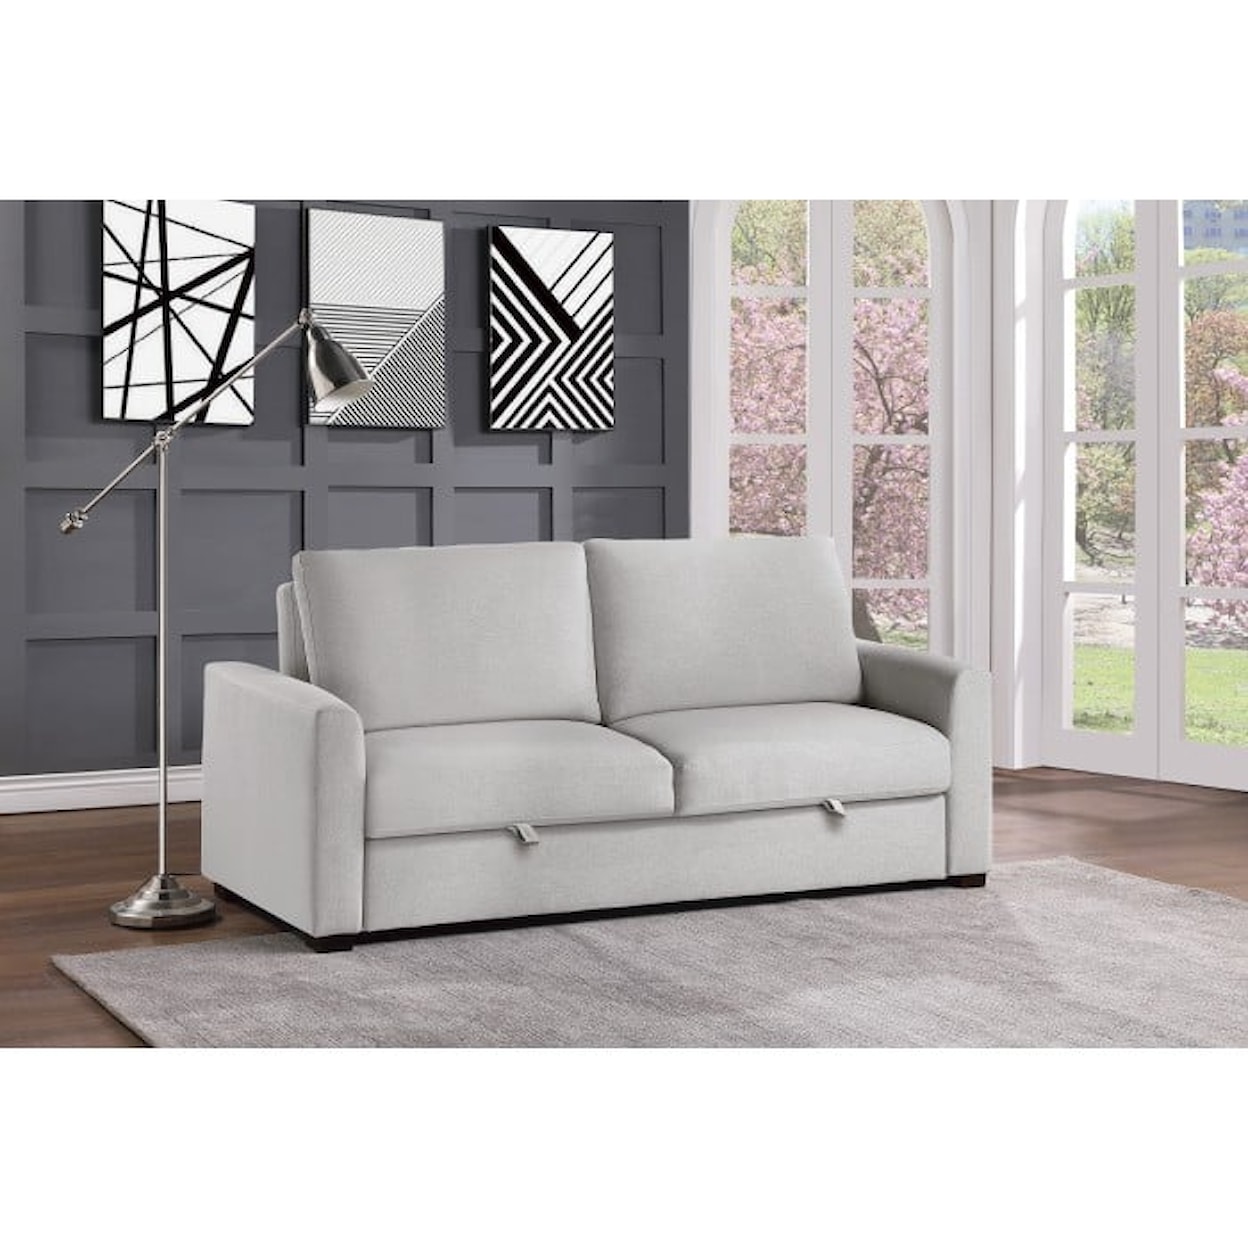 Homelegance Price Convertible Studio Sofa with Pull-out Bed